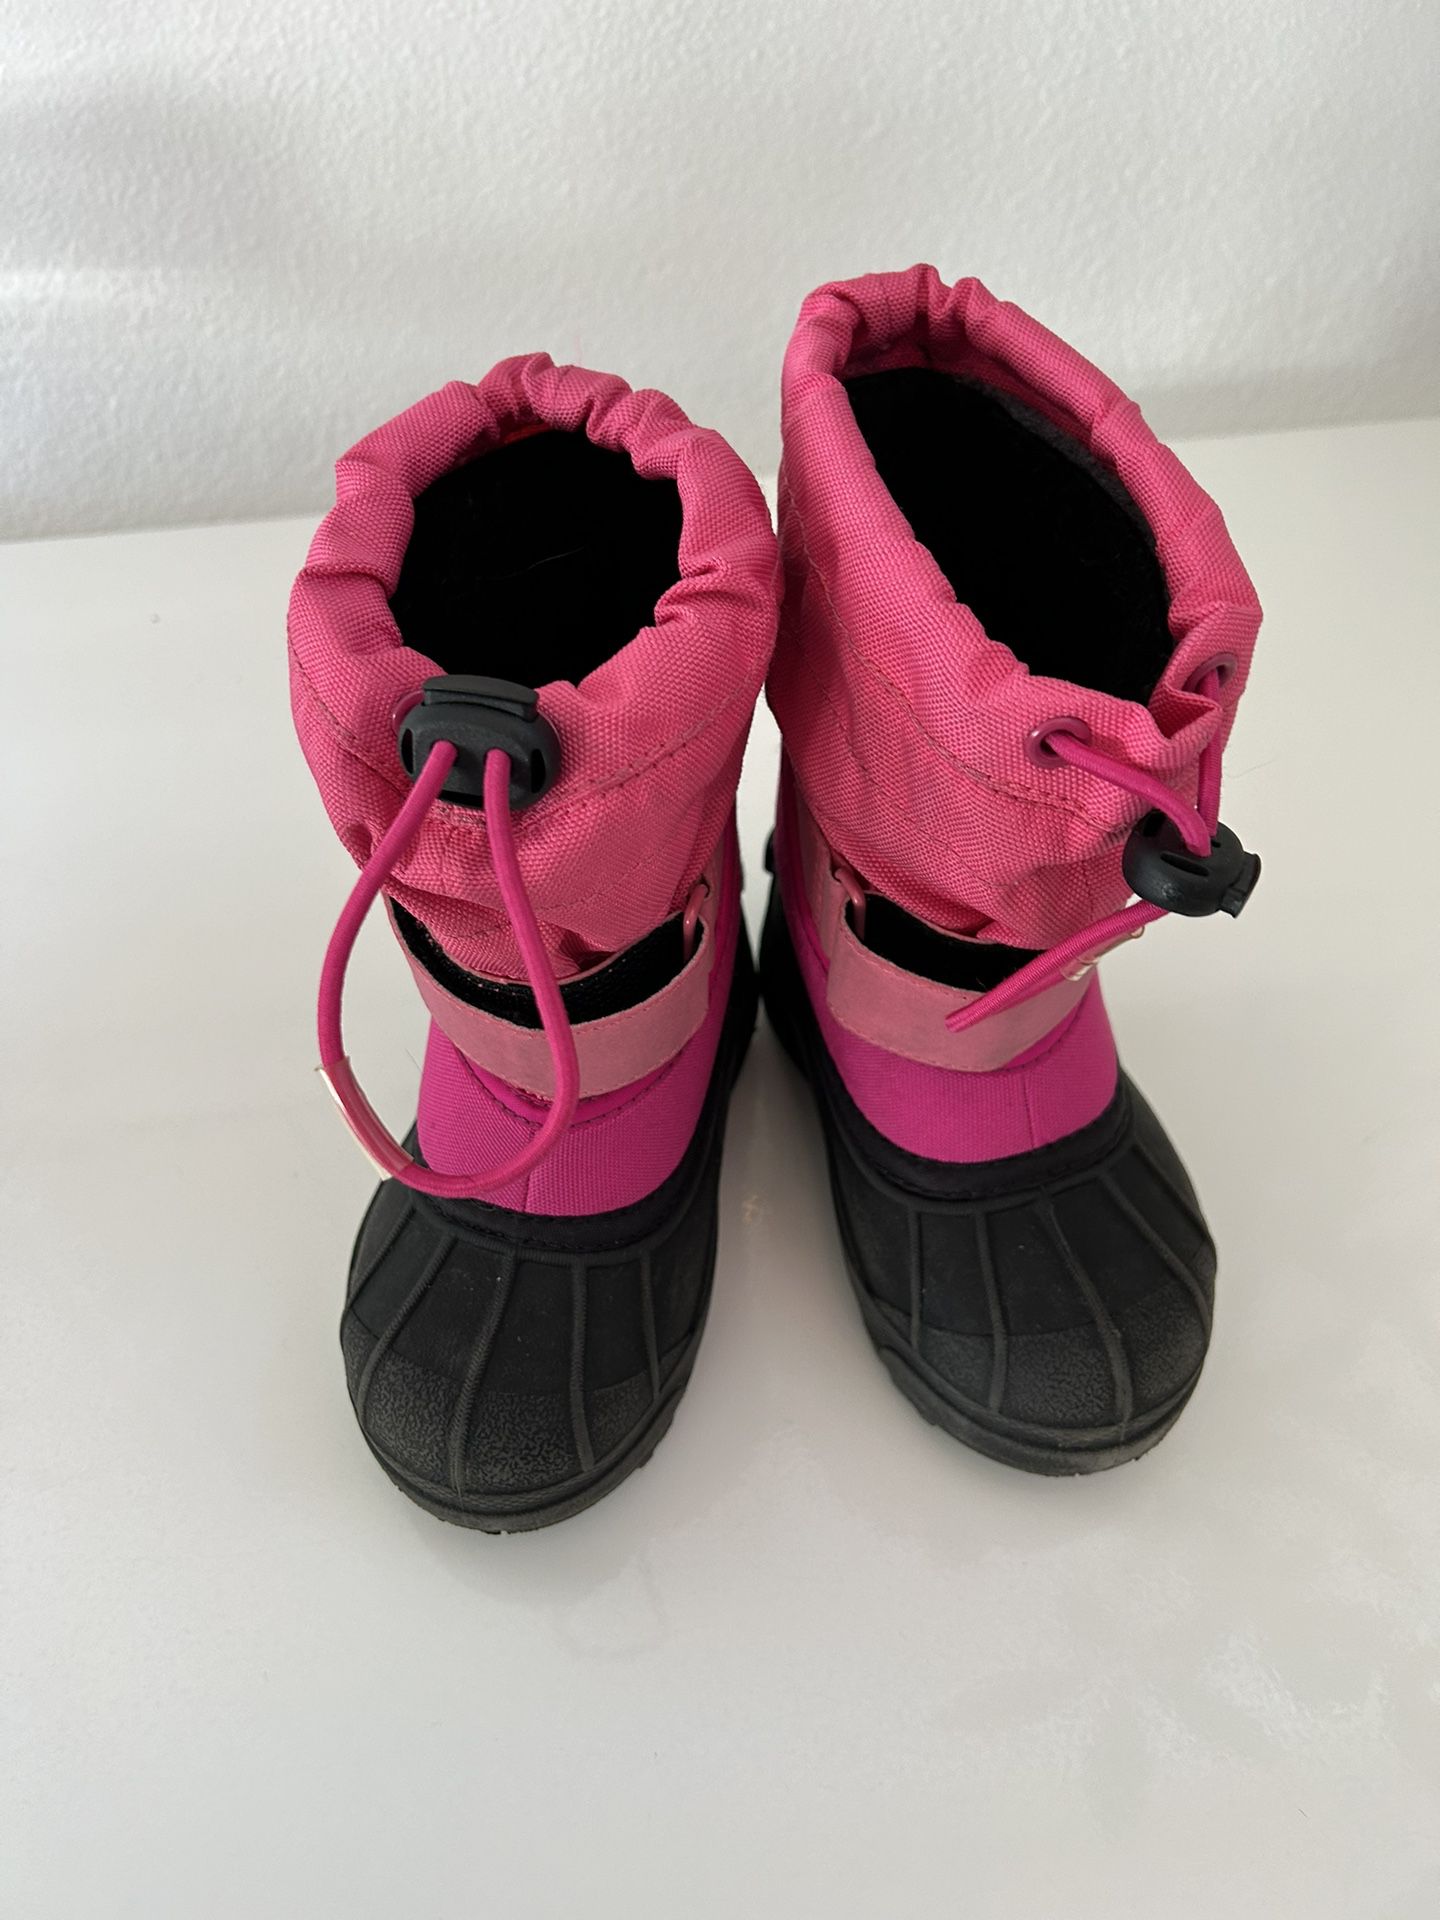 Girls Columbia Snow Boots - Size 8